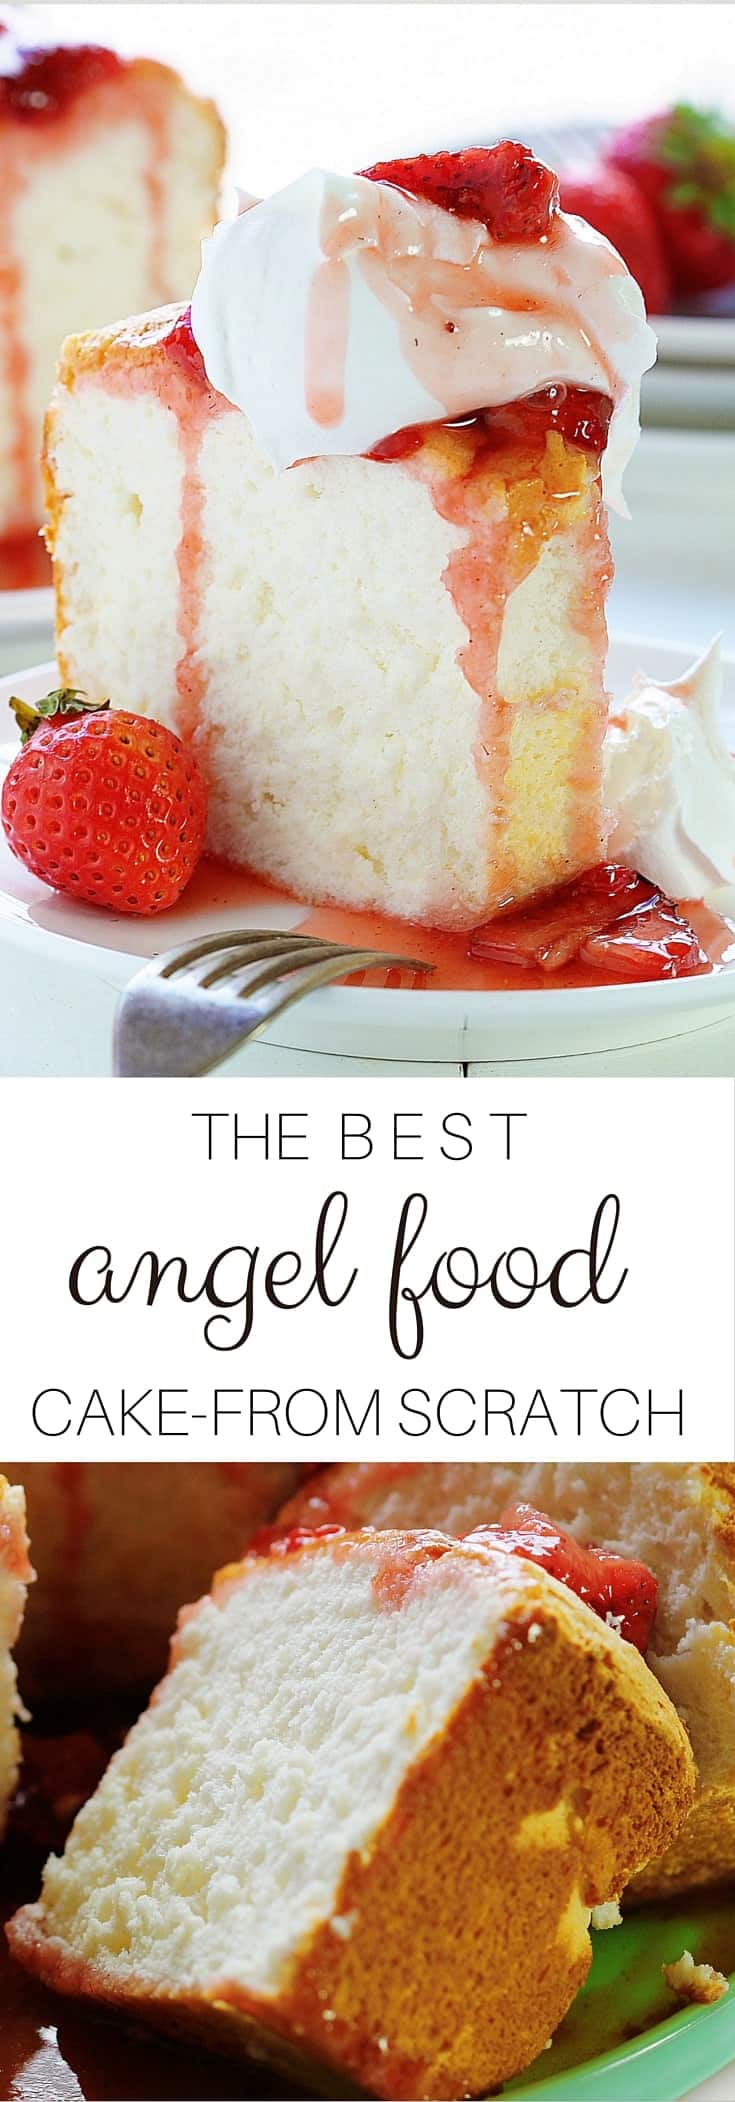 The Roasted Strawberries on this HOMEMADE ANGEL FOOD CAKE will blow your mind!